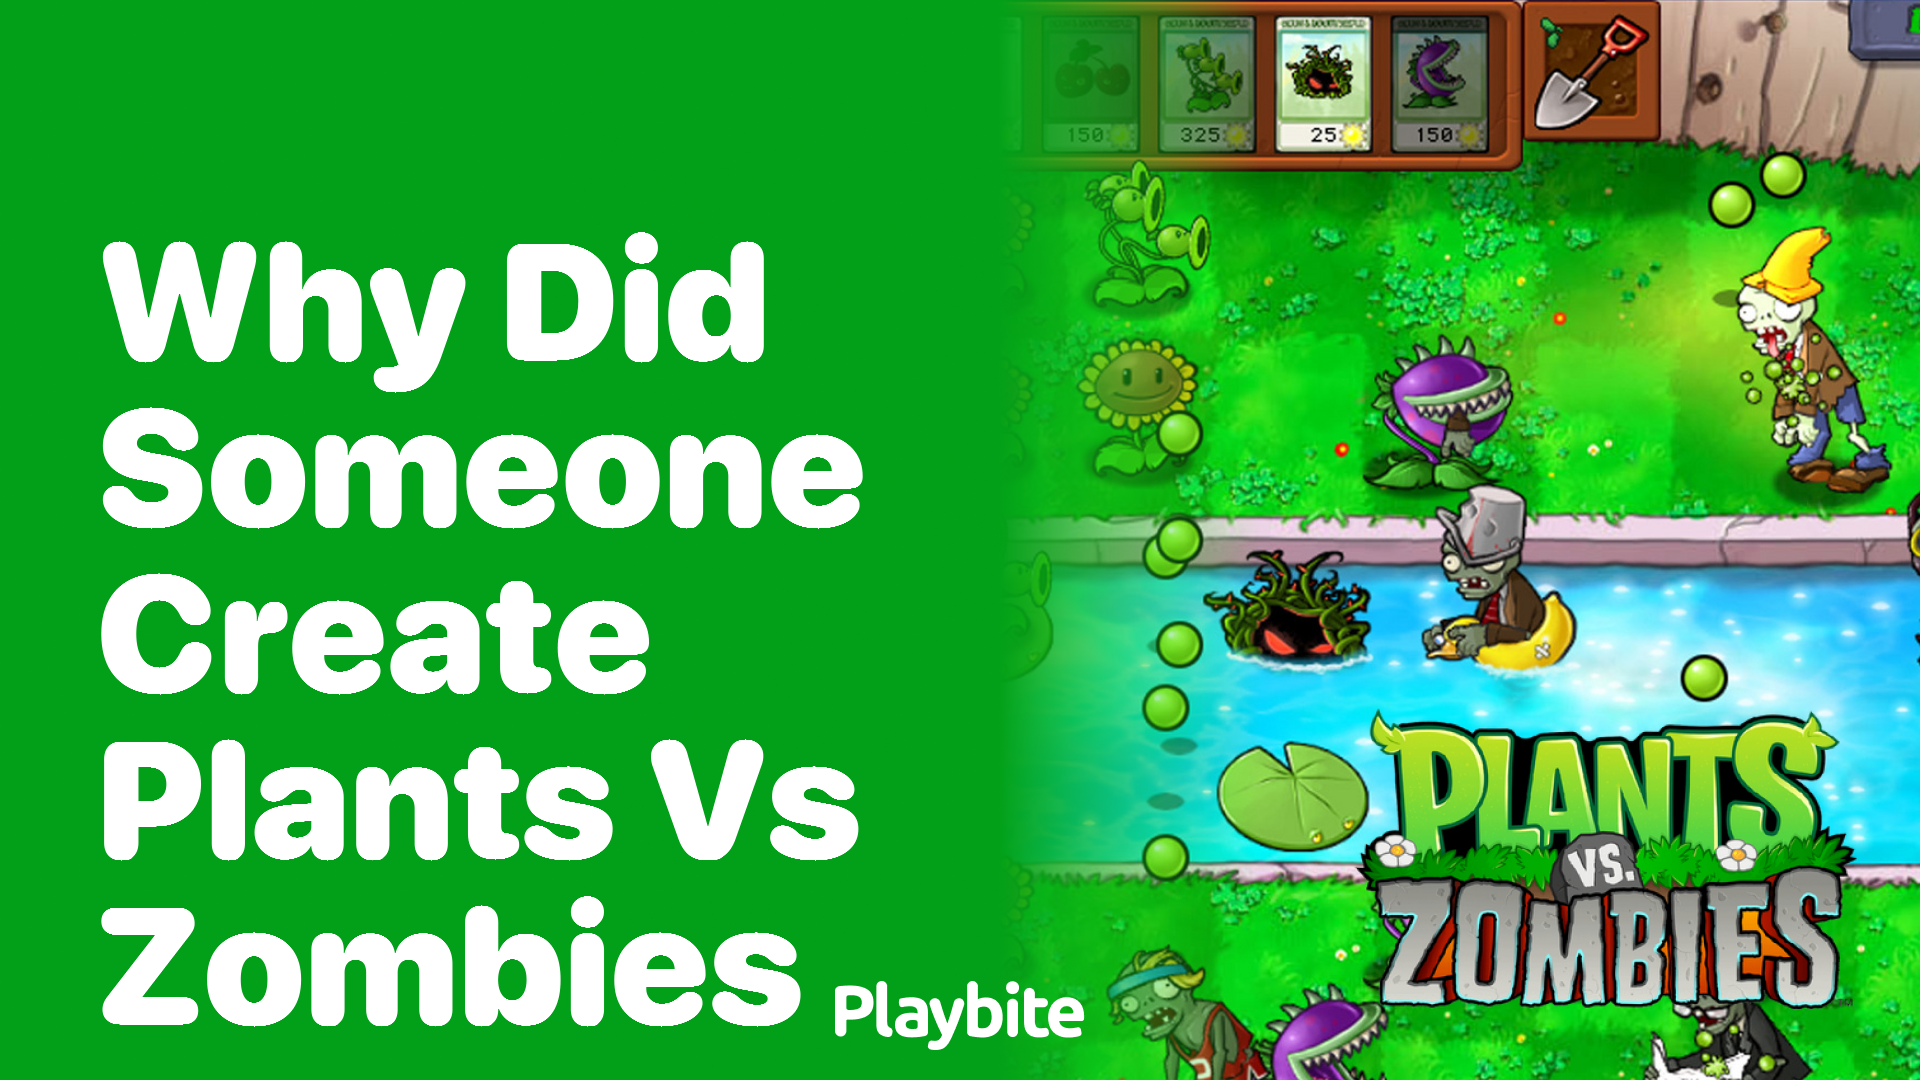 Why did someone create Plants vs Zombies?